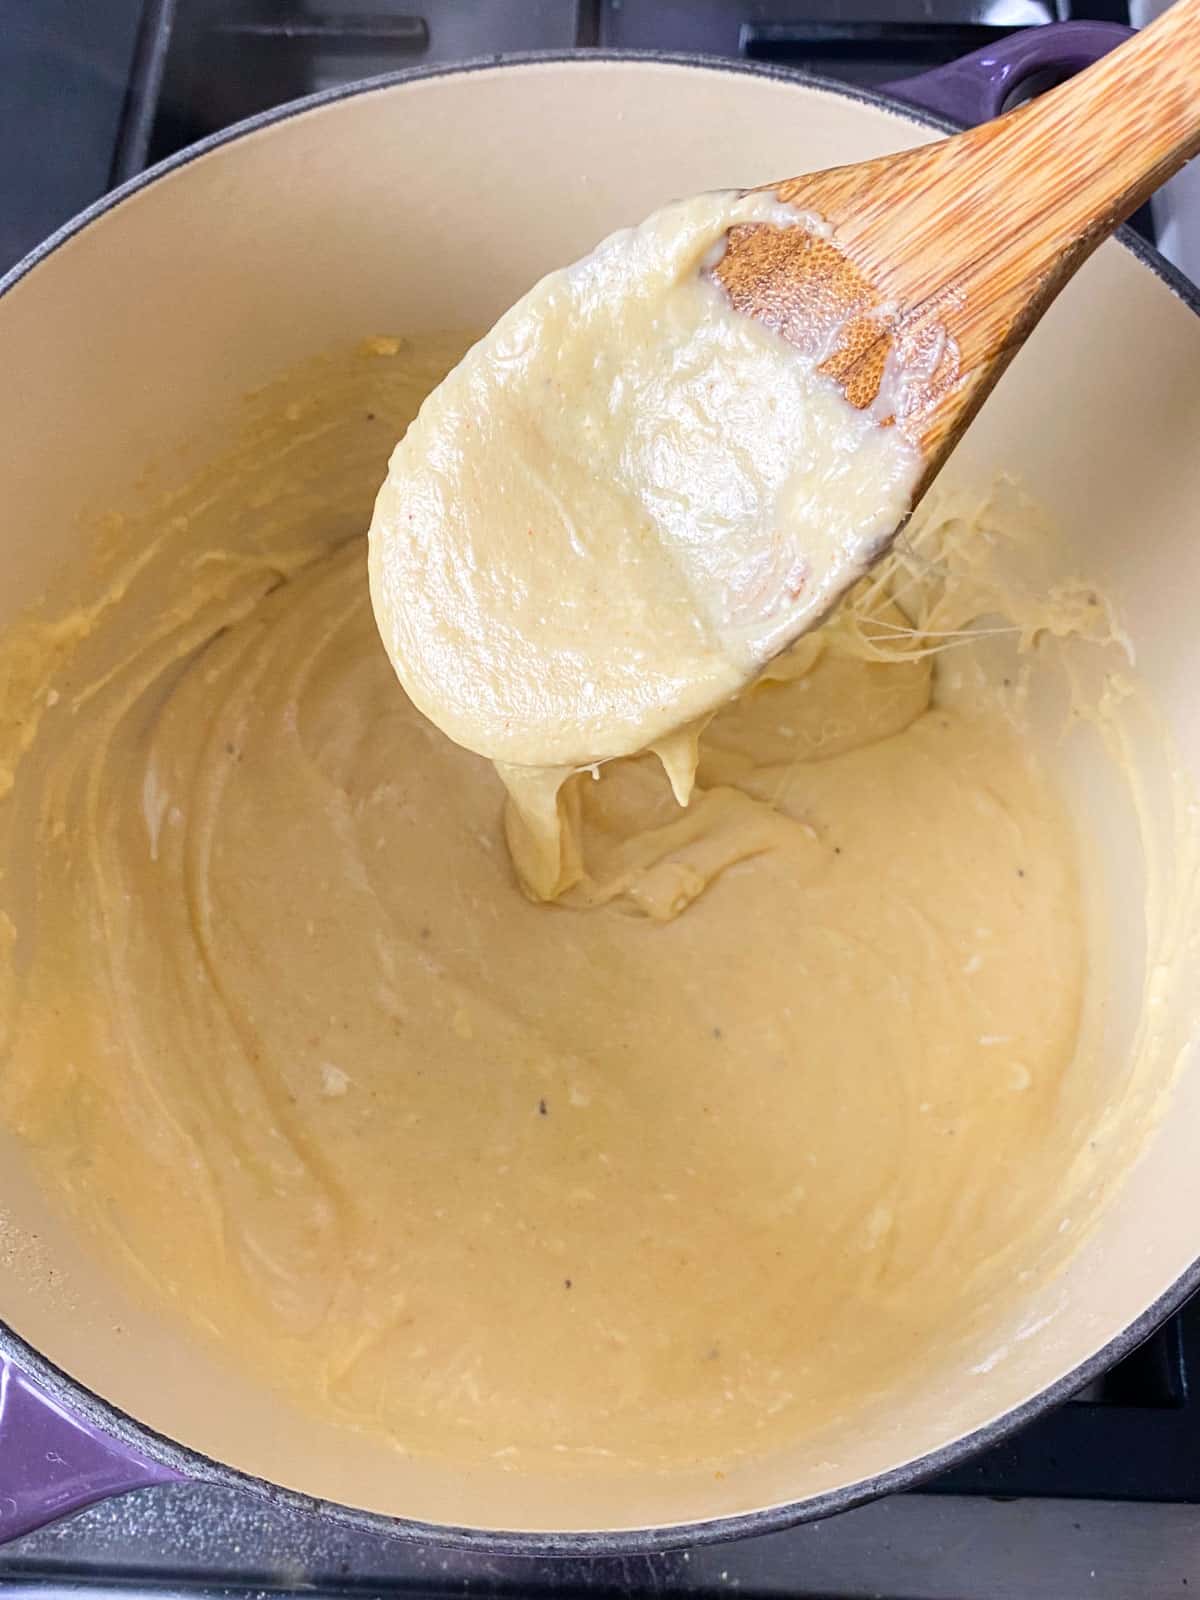 Whisk the shredded cheeses into the bechamel sauce until the cheese has melted and sauce thickens.